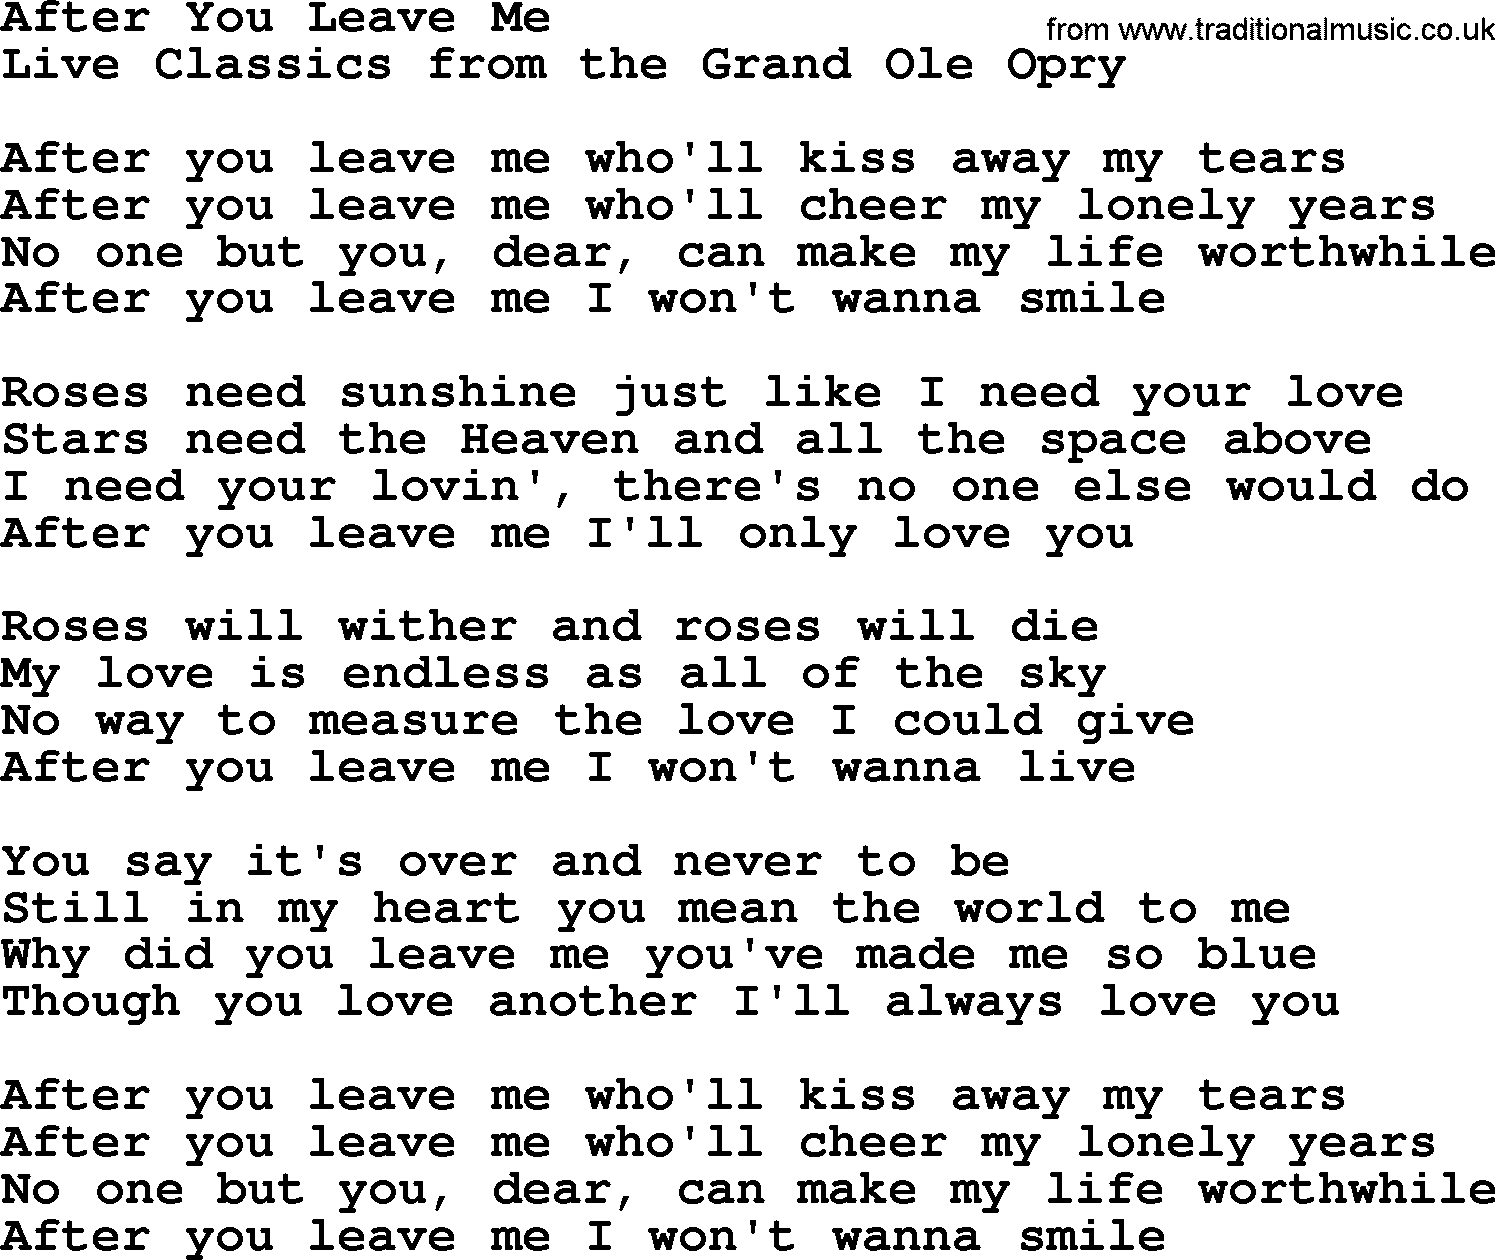 Marty Robbins song: After You Leave Me, lyrics